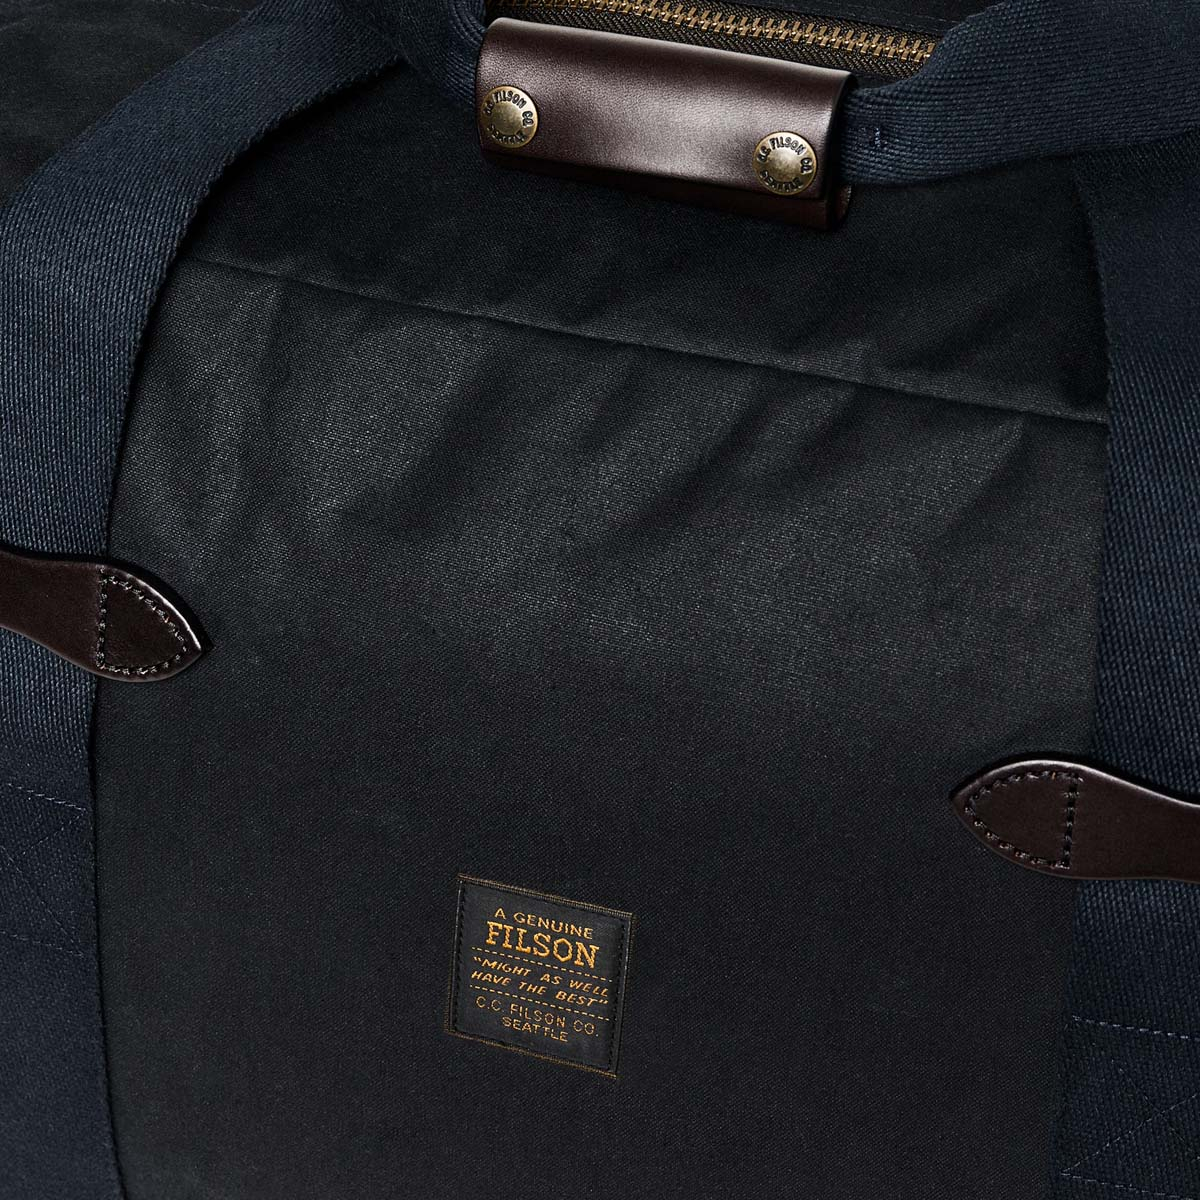 Filson Tin Cloth Small Duffle Bag Navy, a compact waxed-cotton duffle sized for overnight trips